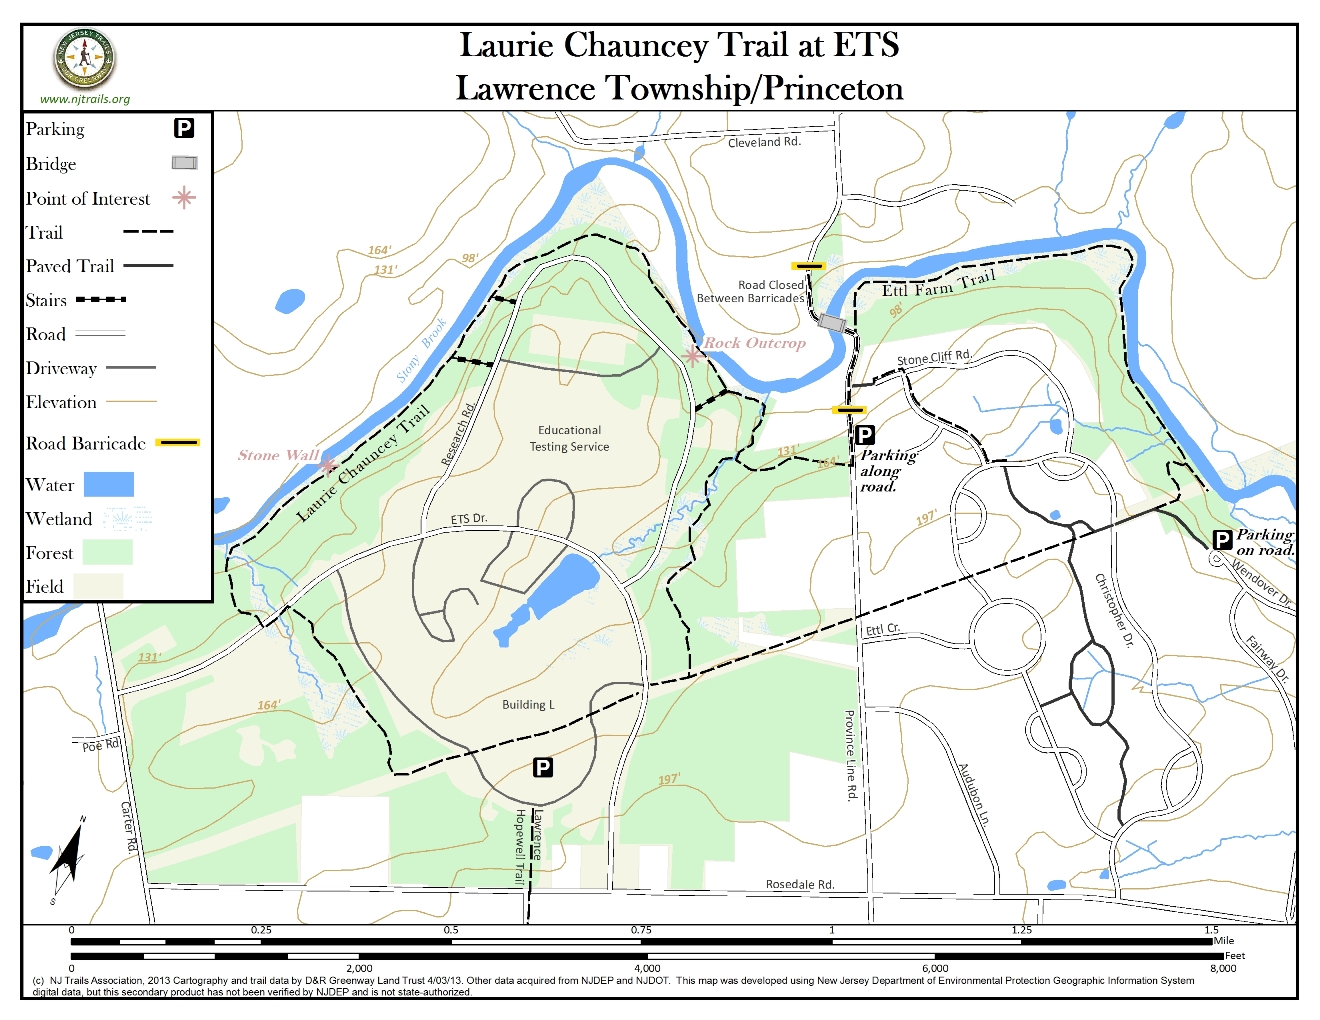 Laurie Chauncey Trail at ETS